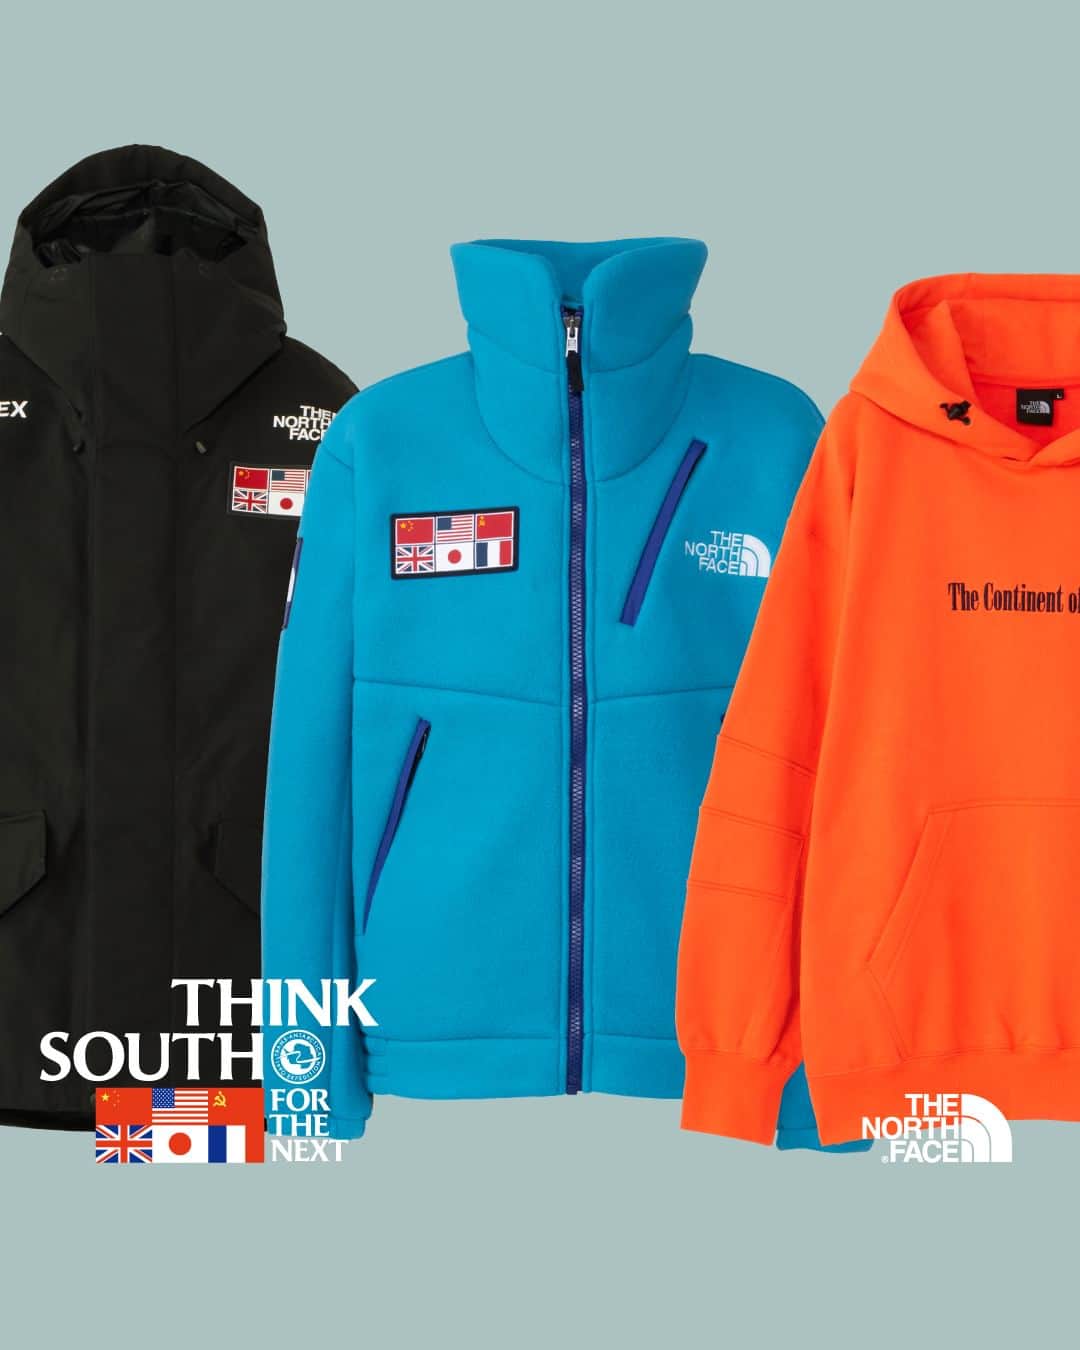 THE NORTH FACE JAPANのインスタグラム：「THINK SOUTH FOR THE NEXT 2023 [Products]  1989年、6カ国6名の冒険家が挑戦した世界初の南極犬ぞり横断。彼らが当時着用したウェアとフィロソフィーをベースに、現在の技術と素材でよりサスティナブルにアップデートされたプロダクトラインナップをご紹介します。  (2,3) Trans Antarctica Fleece Jacket [NA72235] Price: ¥36,300(tax-in) Color: J2, RO  (4,5) Trans Antarctica Parka [NP62238] Price: ¥79,200(tax-in) Color: K, J2  (6,7) Trans Antarctica Hoodie [NT62332] Price: ¥17,050(tax-in) Color: RO, K  プロダクトについては、以下サイトとプロフィール欄ハイライトからご確認いただけます。 https://www.goldwin.co.jp/tnf/whatsnew/detail/?pi3=23411&pi=23410  THINK SOUTH FOR THE NEXT Website: https://www.think-south.com/  #ザノースフェイス #thenorthface #neverstopexploring #thinksouth #thinksouthforthenext2023 #transantarcticaexpedition」